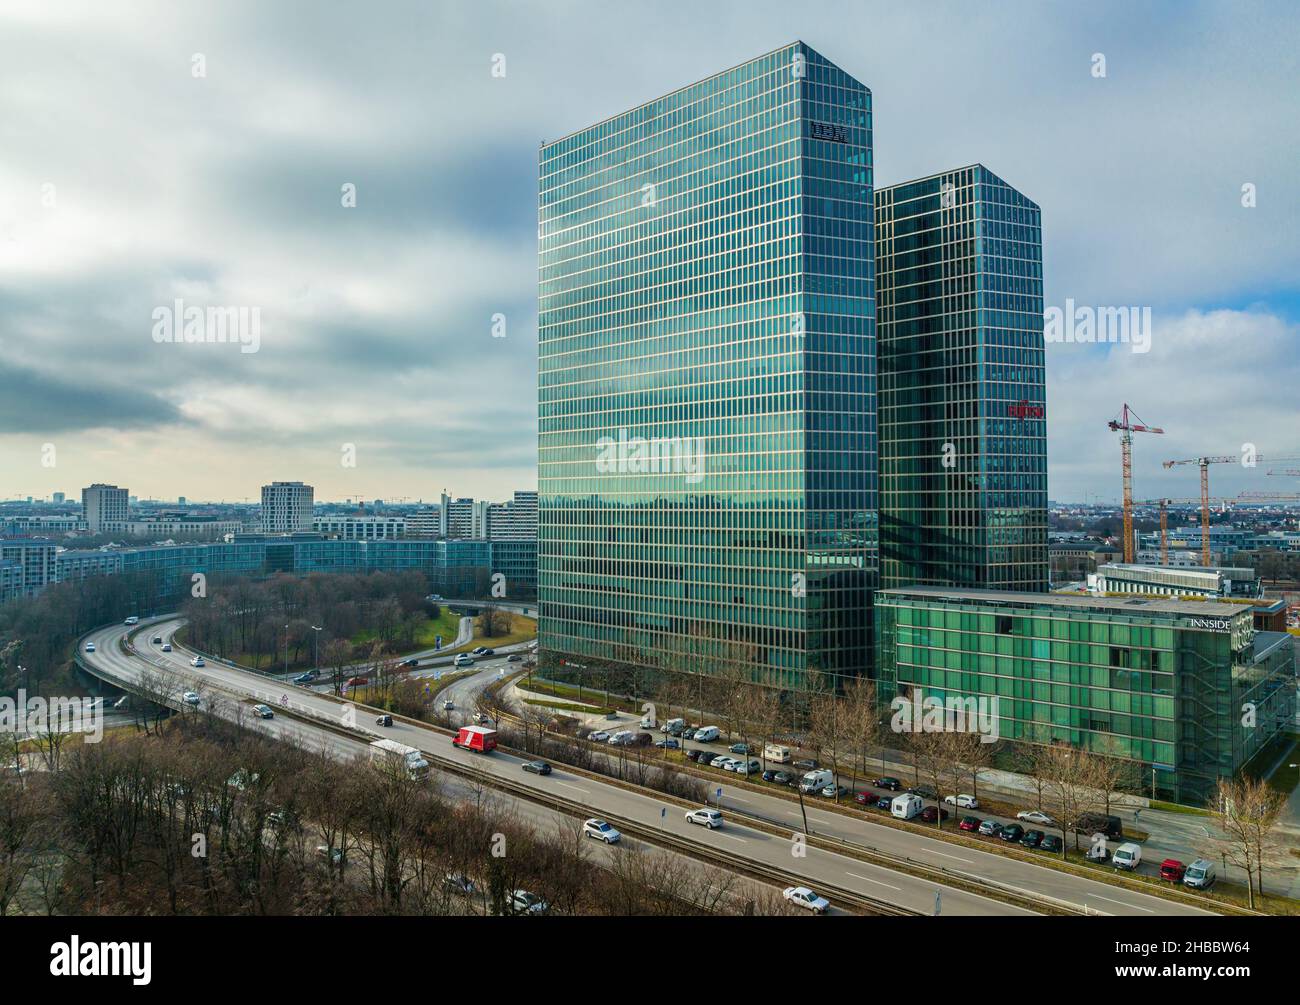 MUNICH, GERMANY - DECEMBER 17: Highlight Business Towers on december 17, 2021 in Munich. The two most important tenants, IBM and Fujitsu have their Stock Photo